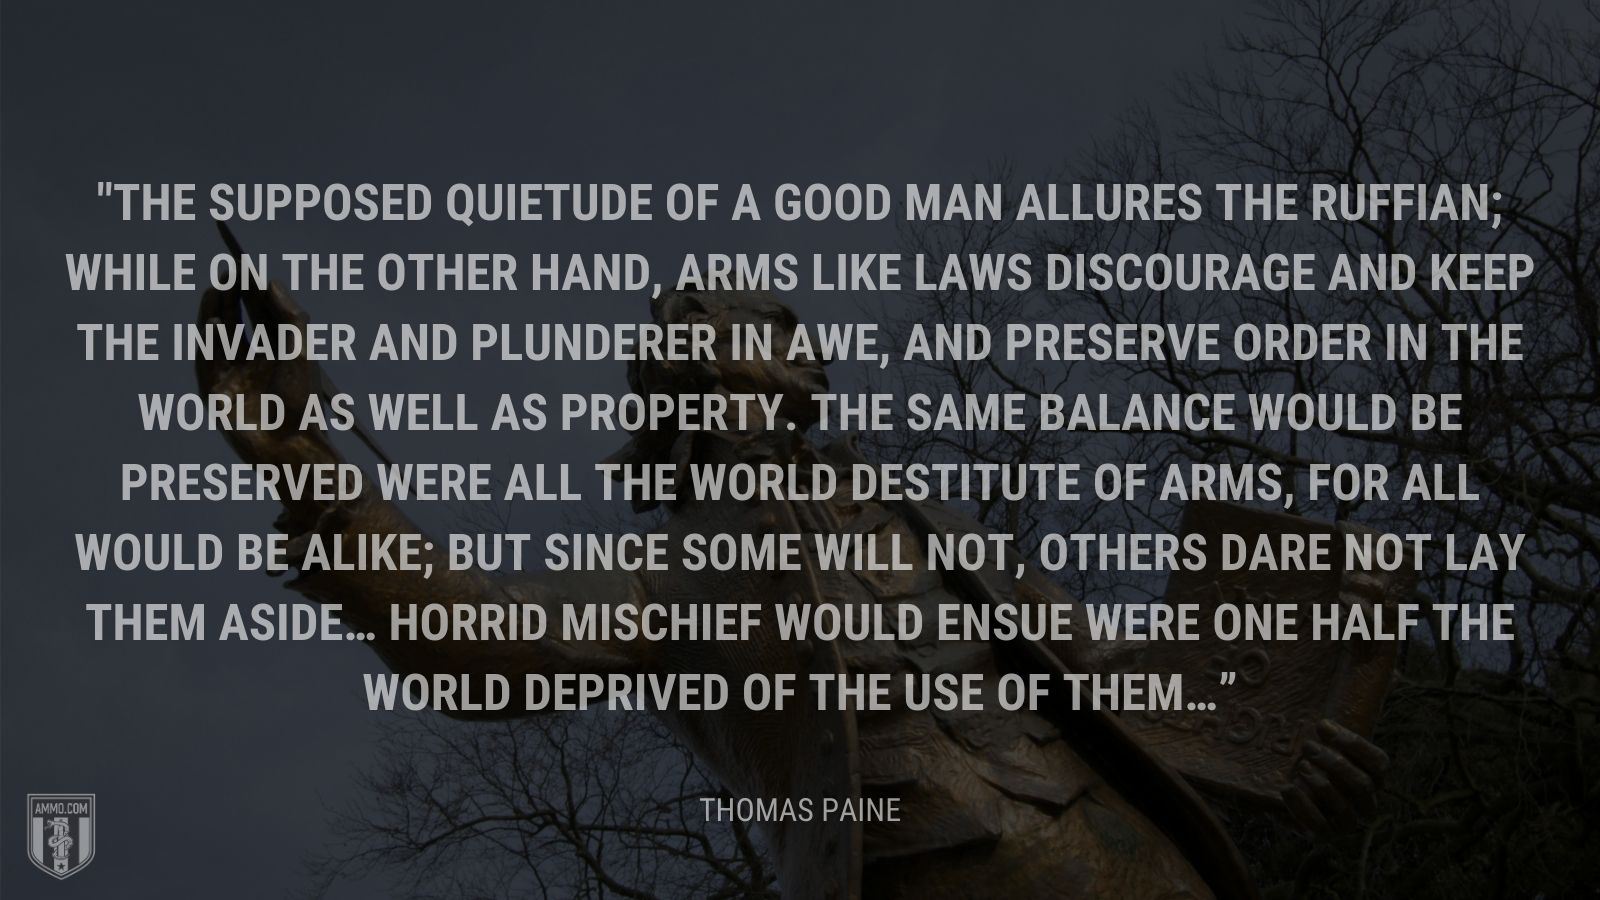 “The supposed quietude of a good man allures the ruffian; while on the other hand, arms like laws discourage and keep the invader and plunderer in awe, and preserve order in the world as well as property. The same balance would be preserved were all the world destitute of arms, for all would be alike; but since some will not, others dare not lay them aside… Horrid mischief would ensue were one half the world deprived of the use of them…” - Thomas Paine